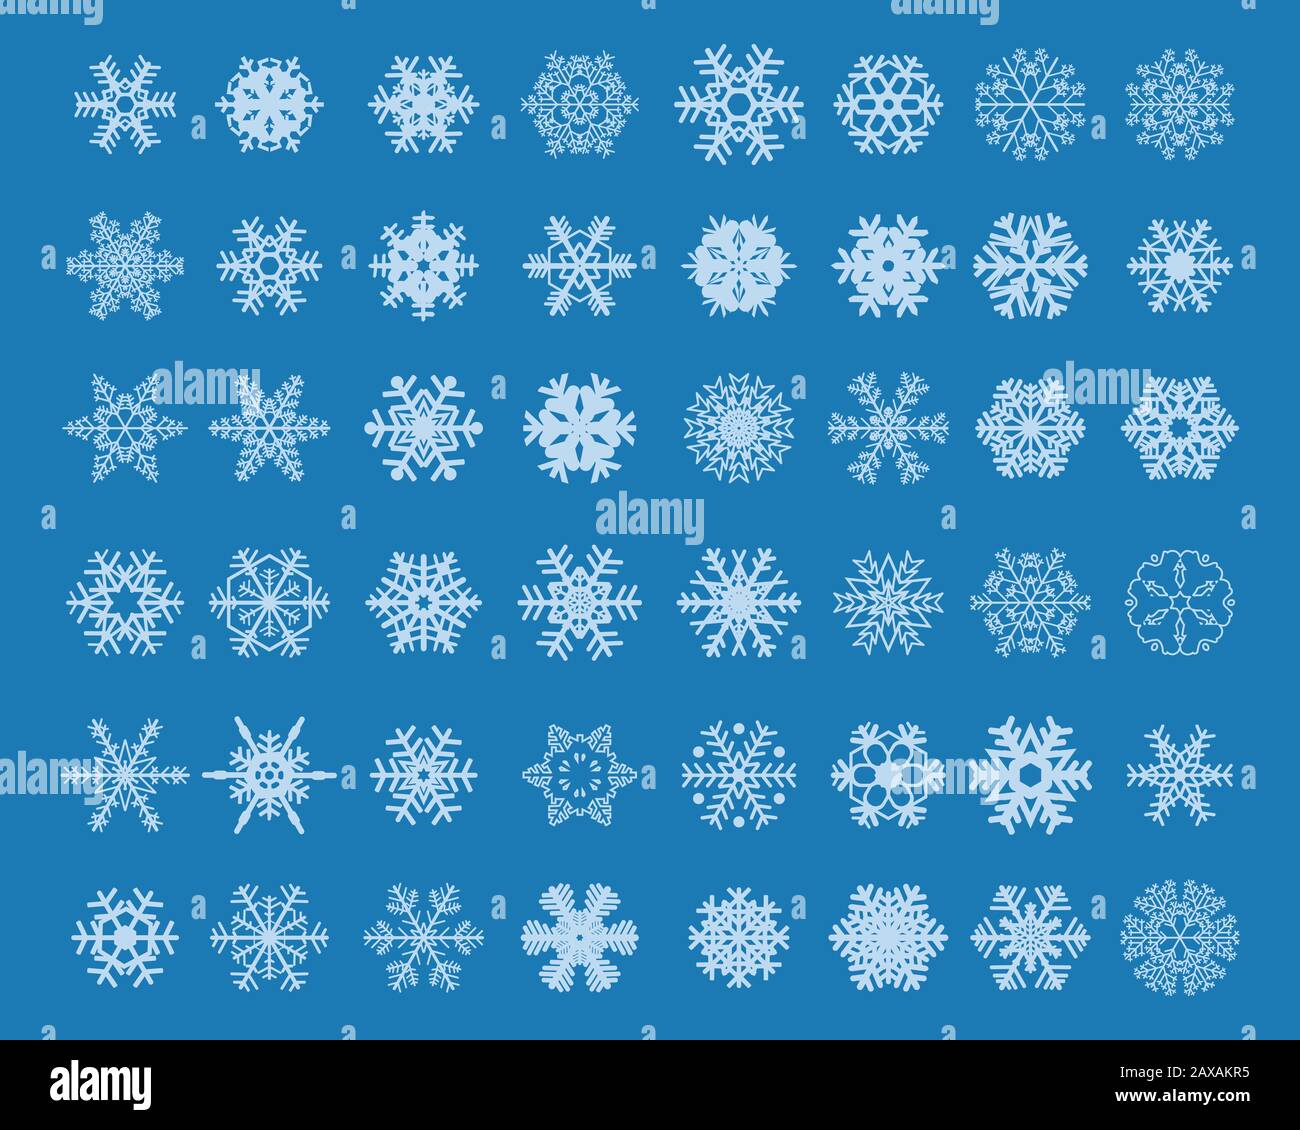 Set of different white snowflakes on a blue background Set of different white snowflakes on a blue background Stock Photo